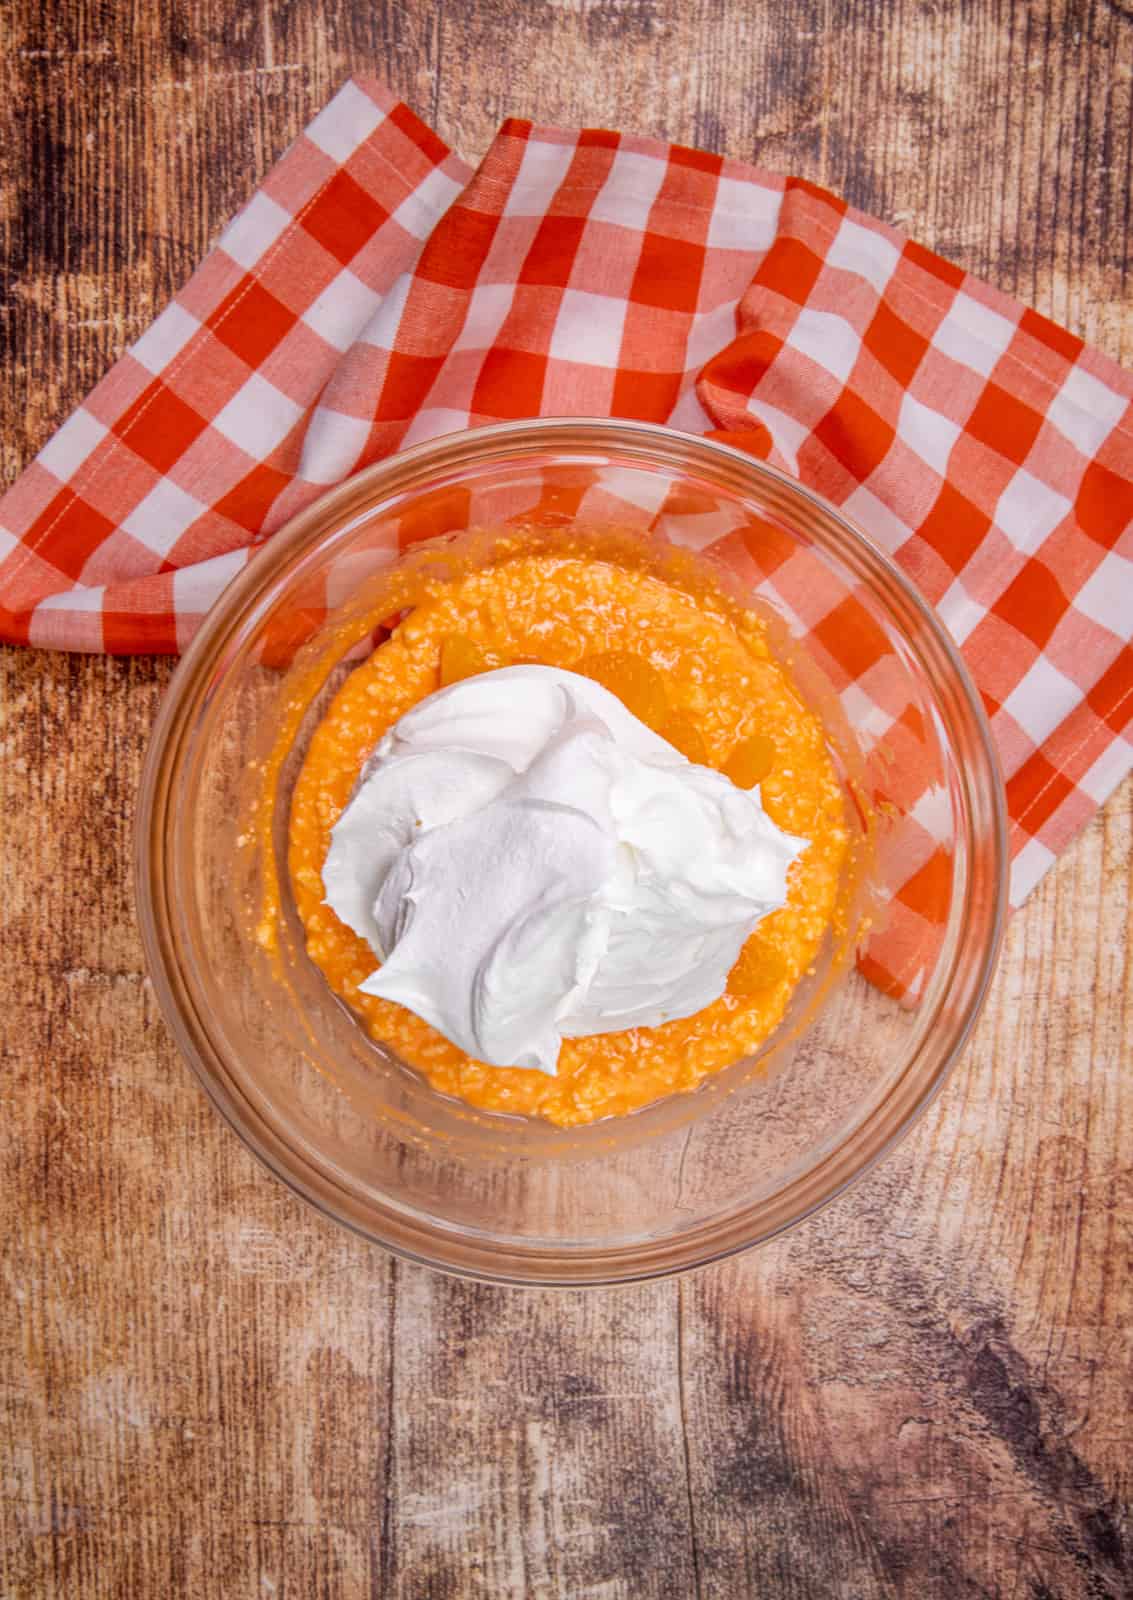 cool whip whipped topping shown dolloped on top of orange gelatin mixture in a clear glass bowl.